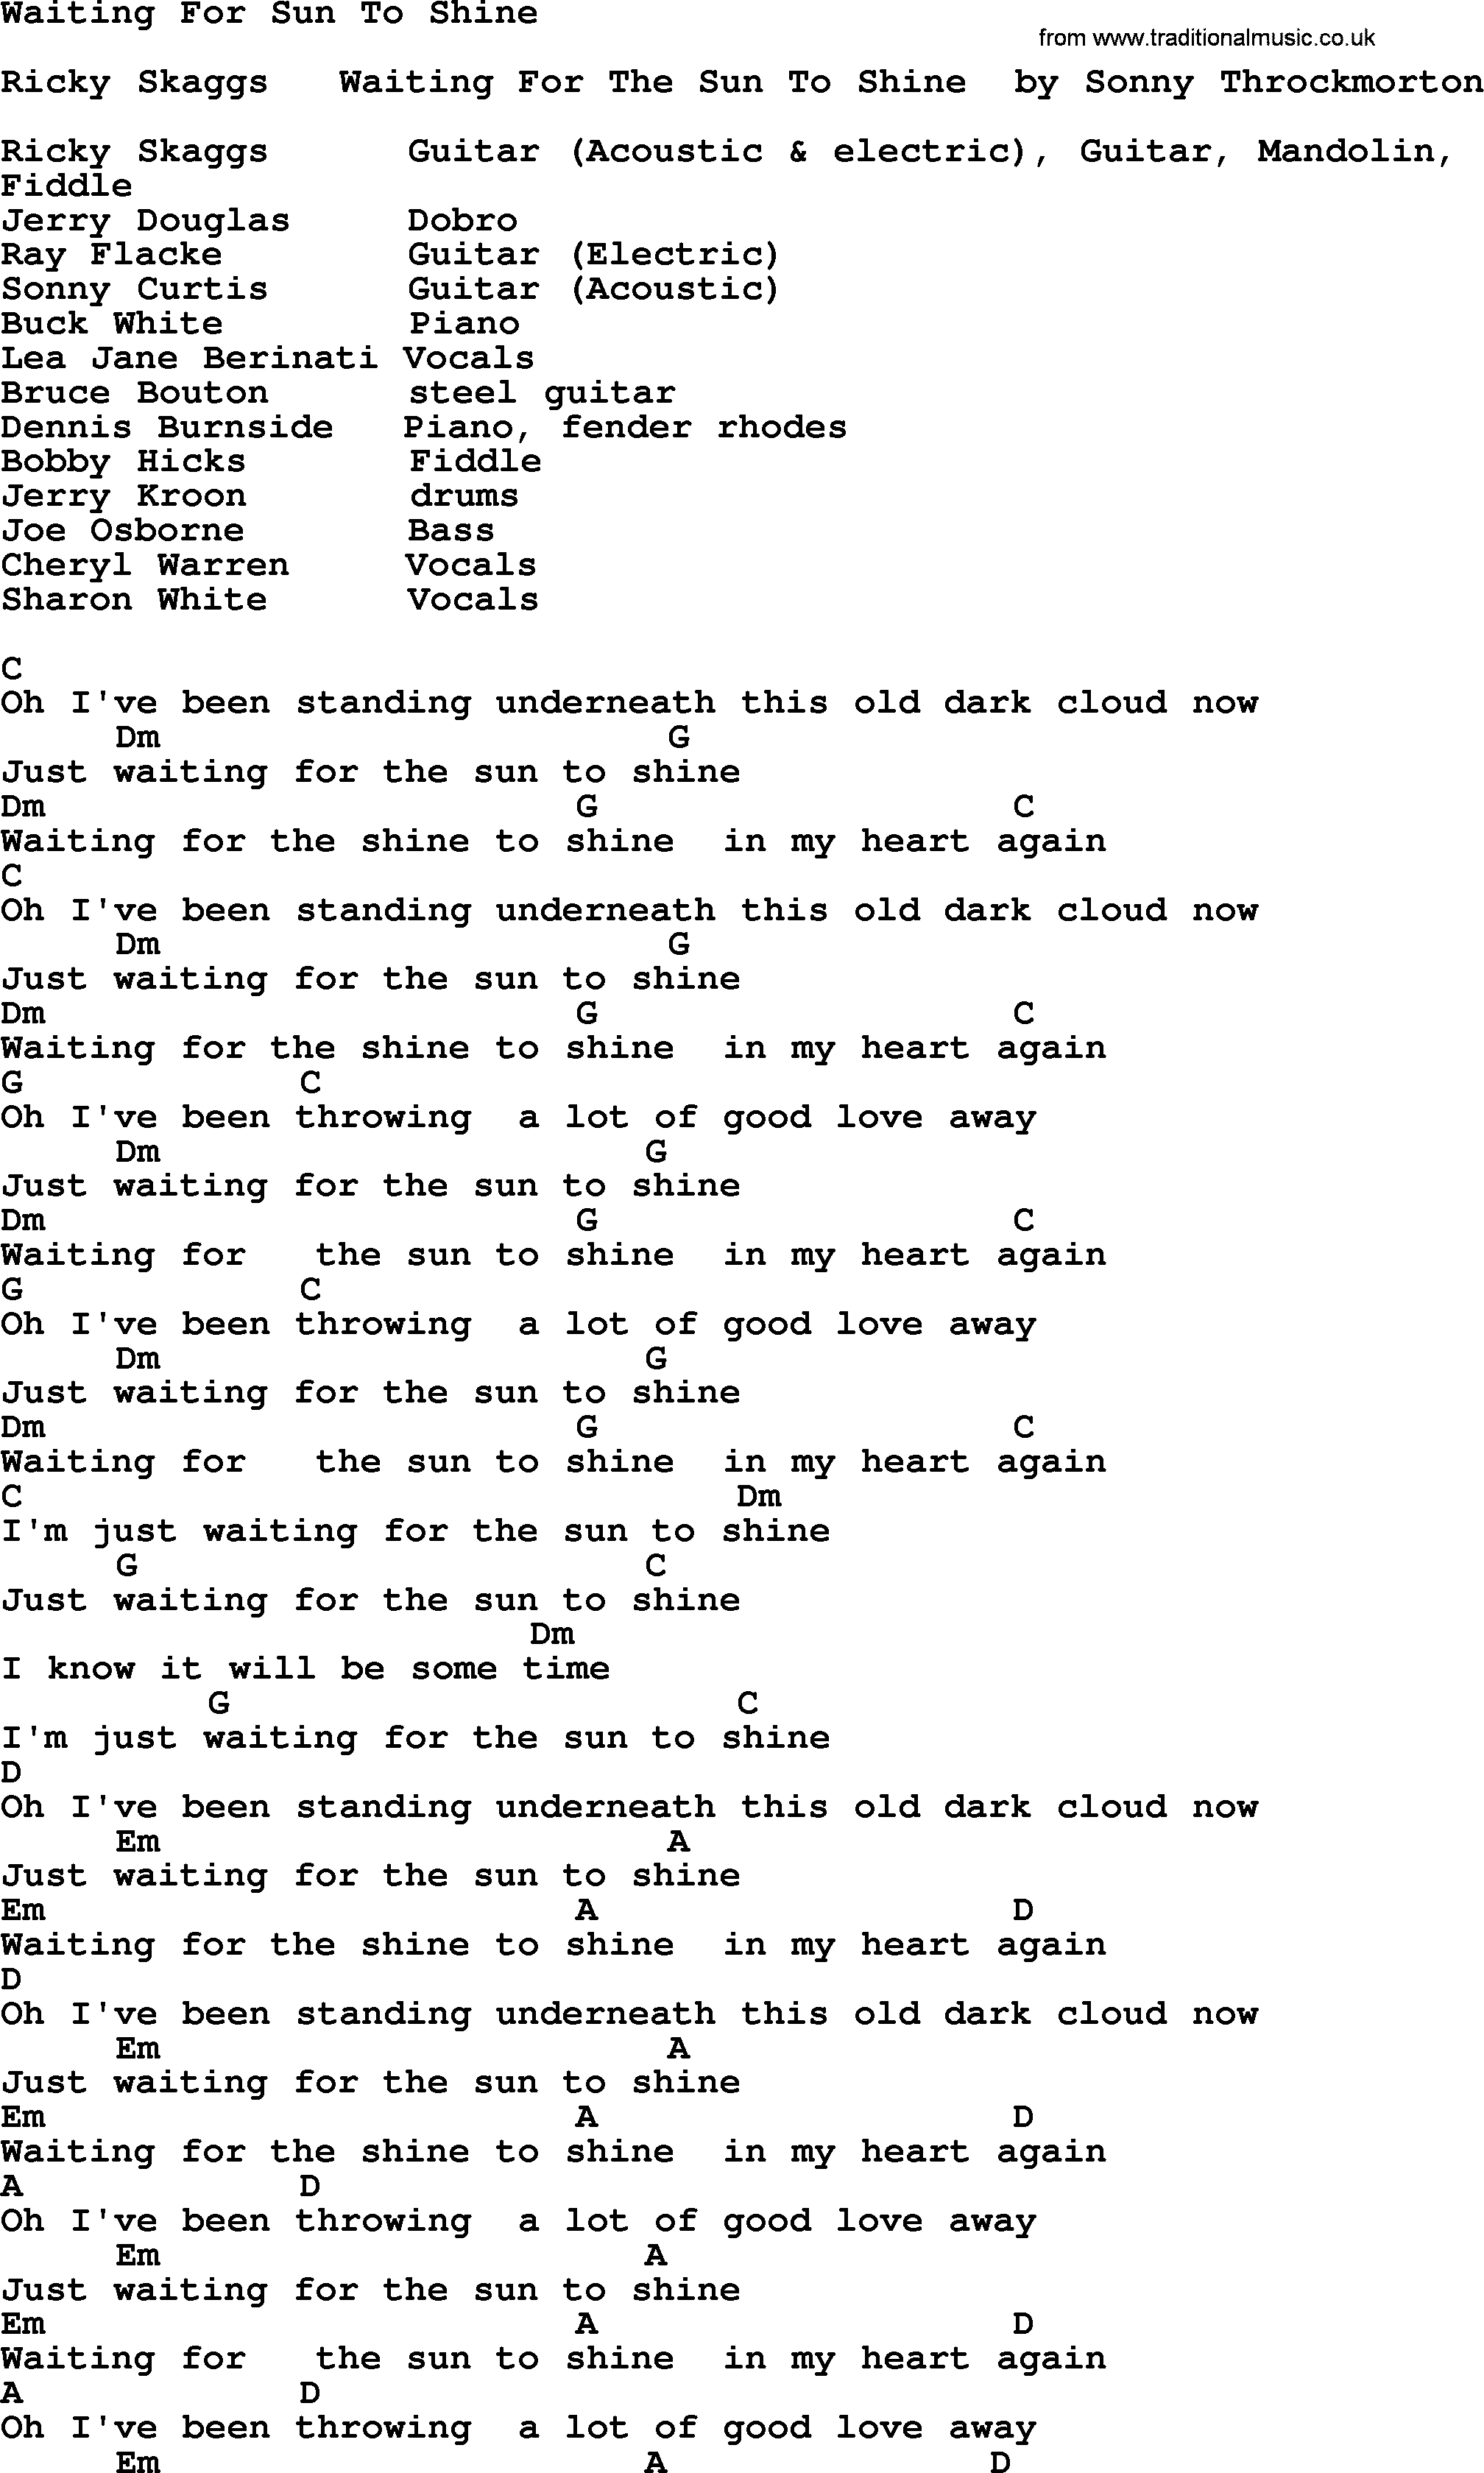 Bluegrass song: Waiting For Sun To Shine, lyrics and chords